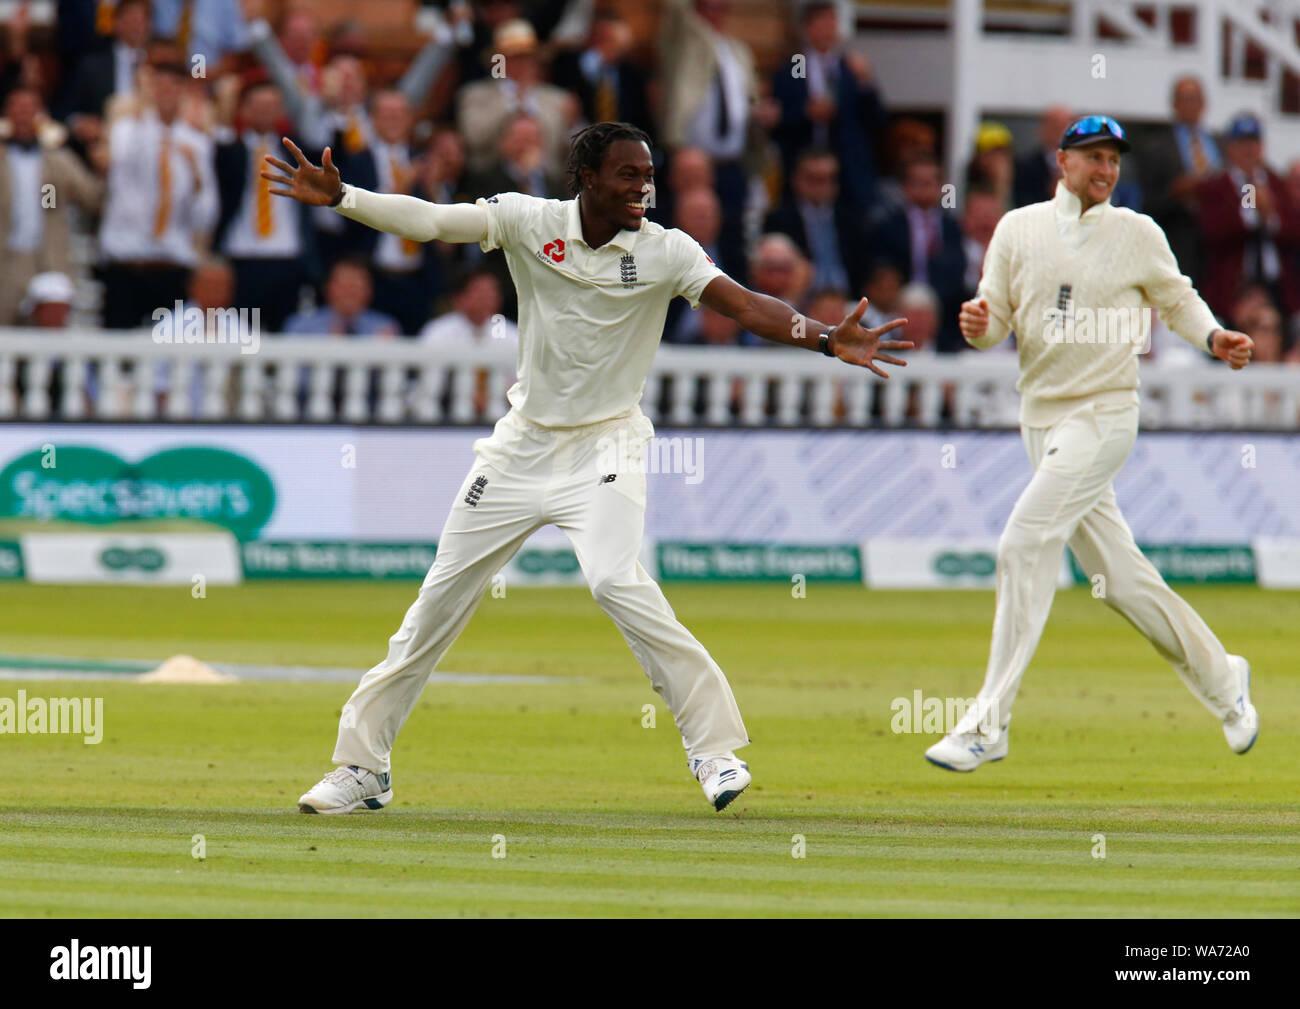 London, UK. 18 August 2019. Jofra Archer of England celebrates the catch of au1 by Jonny Bairstow of England during play on the 5th day of the second Ashes cricket Test match between England and Australia at Lord's Cricket ground in London, England on August 18, 2019 Credit: Action Foto Sport/Alamy Live News Stock Photo